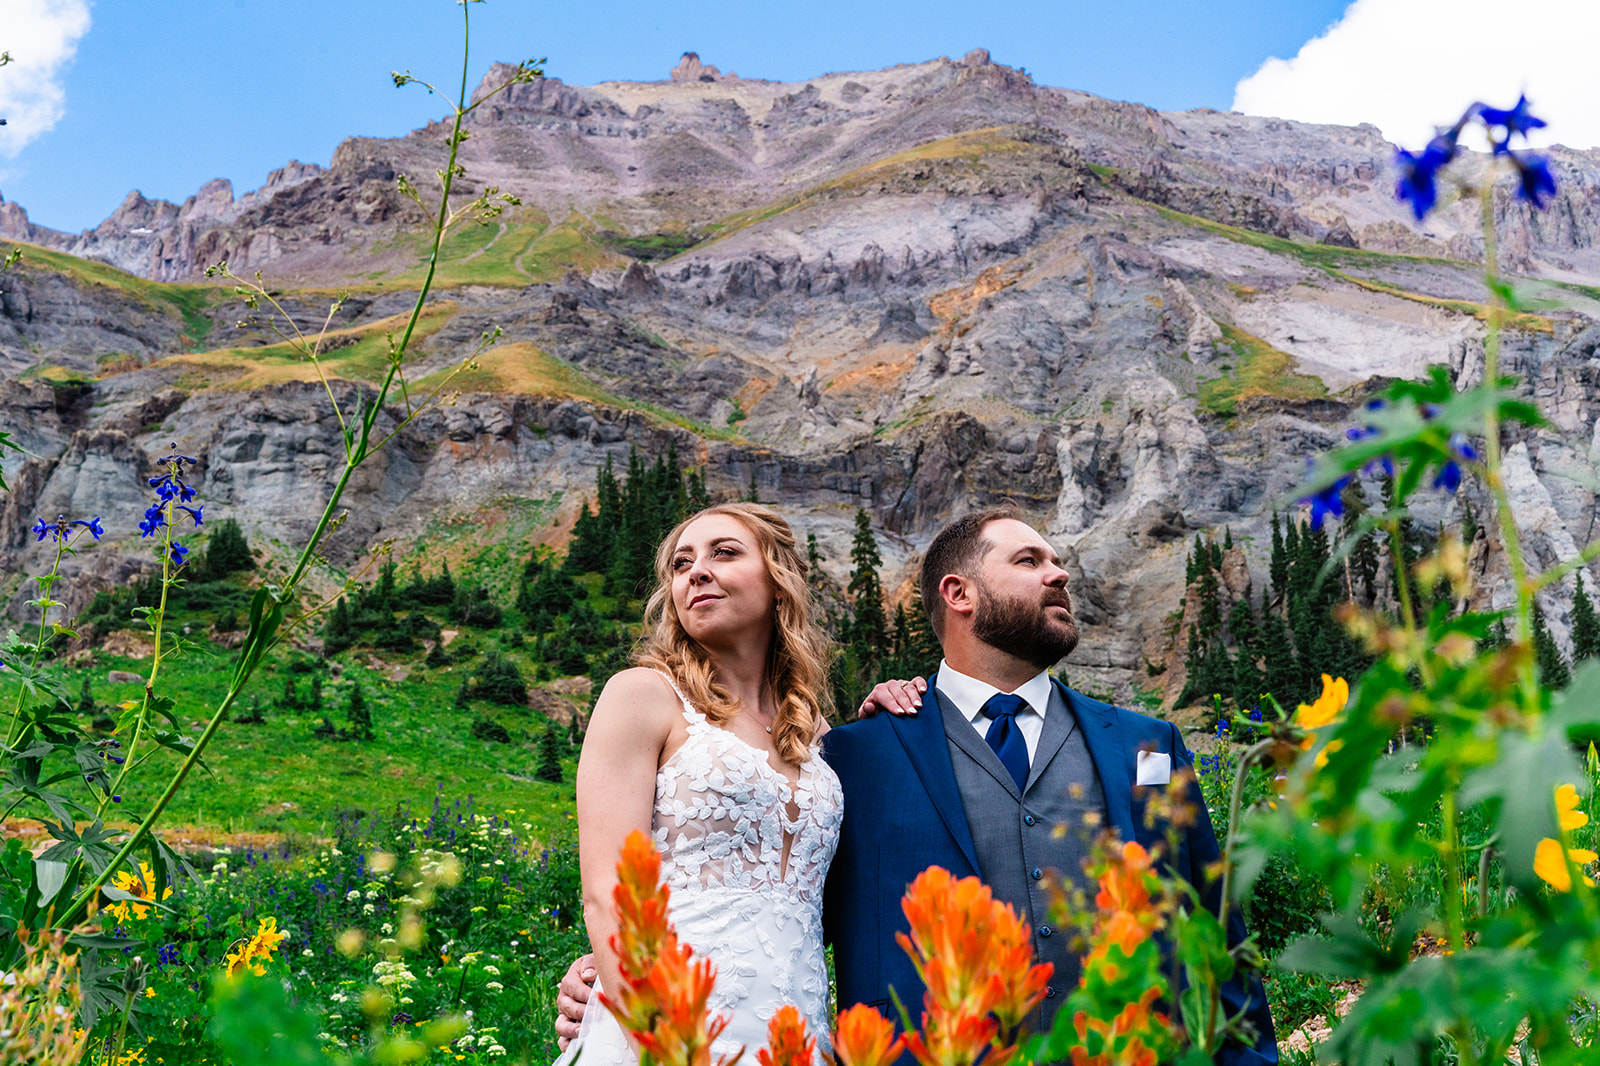 Bride and groom posing in a field of flowers and grass at Yankee Boy Basin